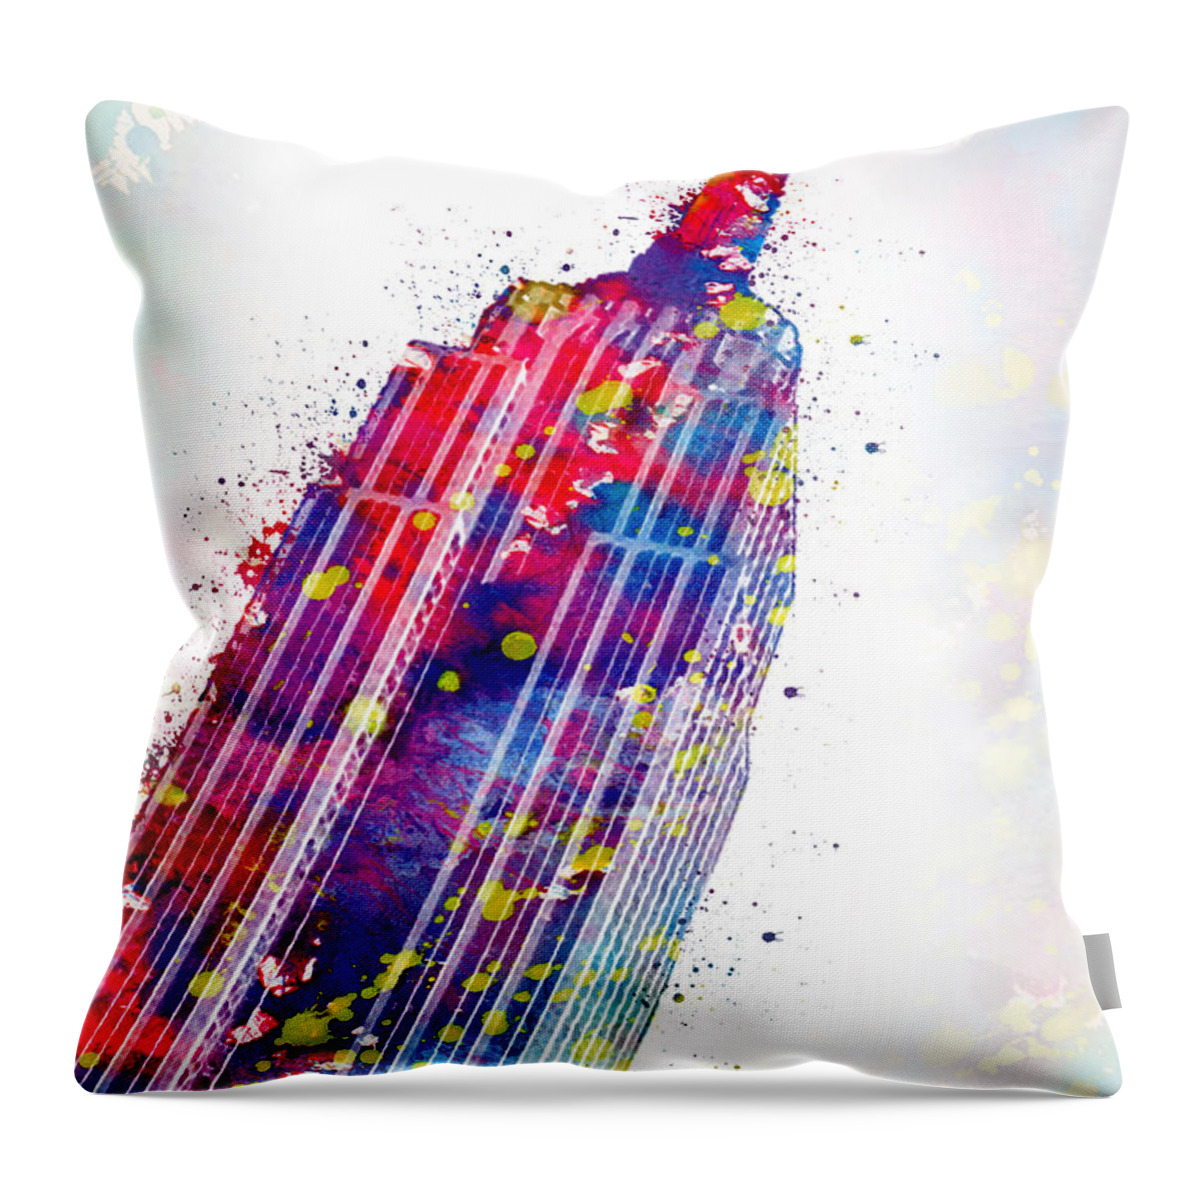 Empire State Building Throw Pillow featuring the digital art Empire State Building by Mark Ashkenazi